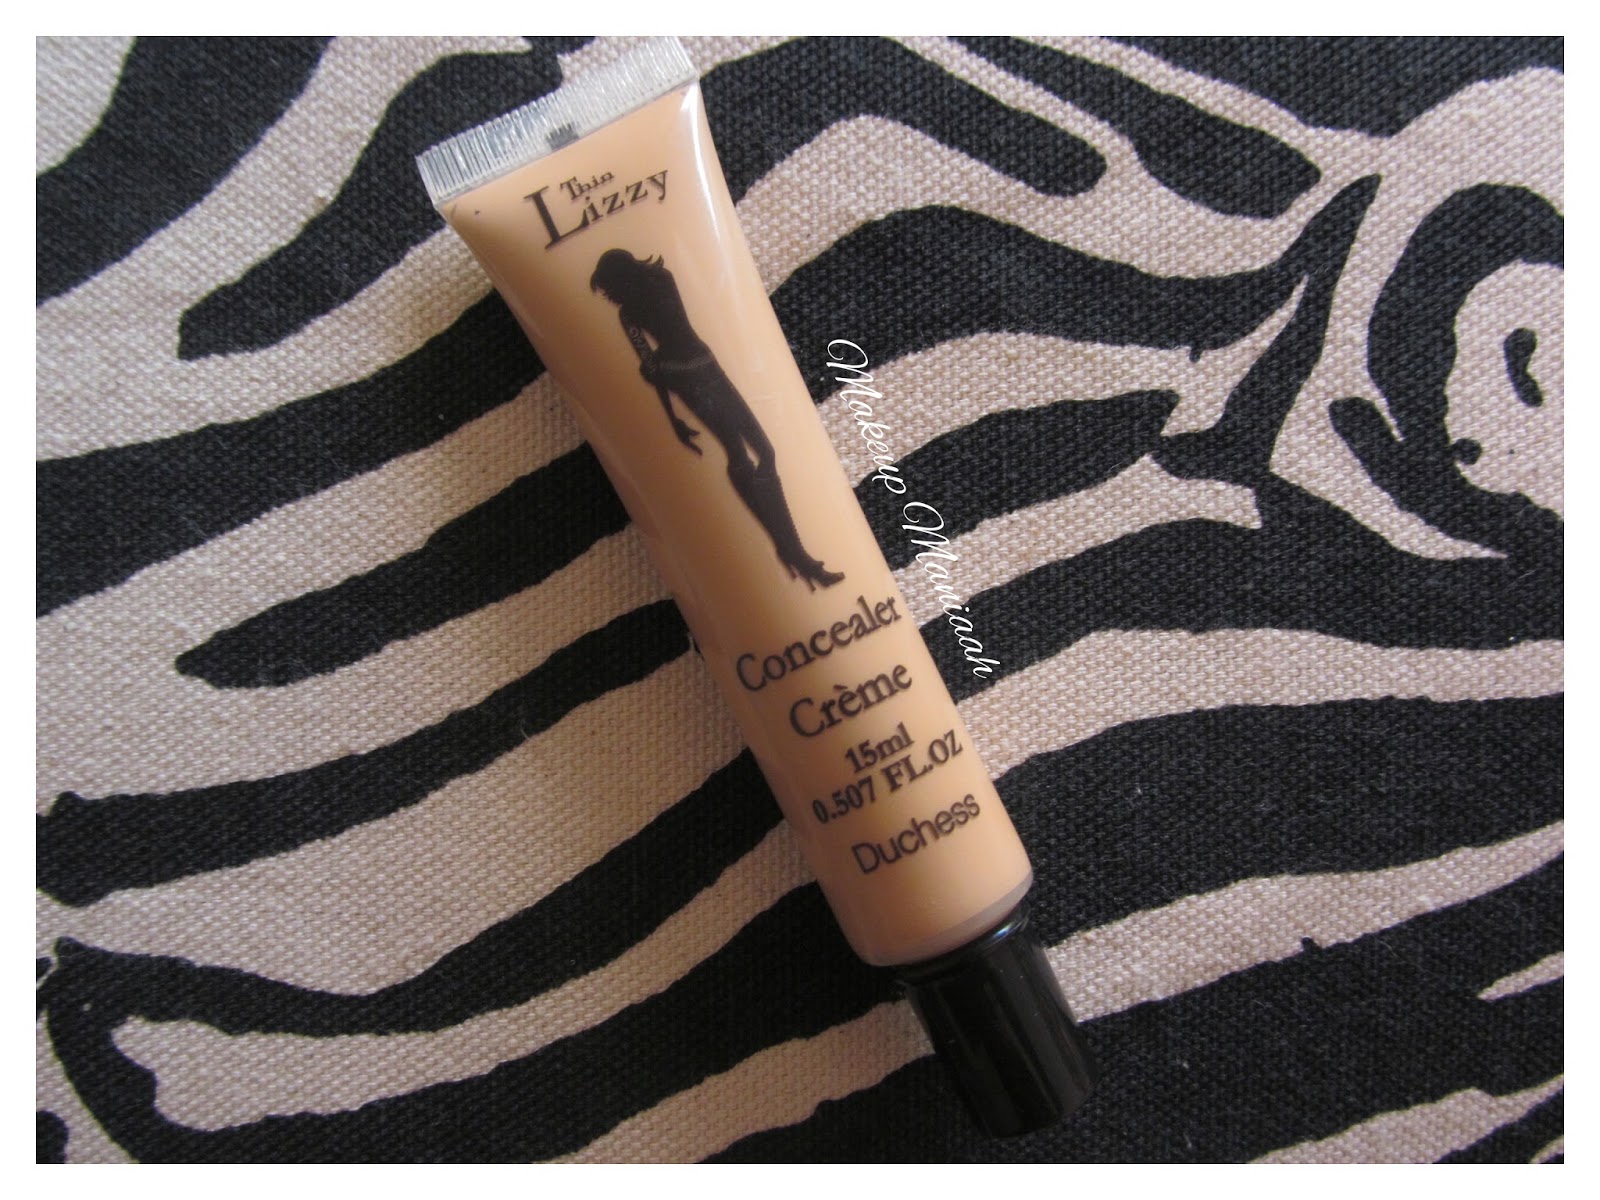 Thin Lizzy Concealer Colour Chart